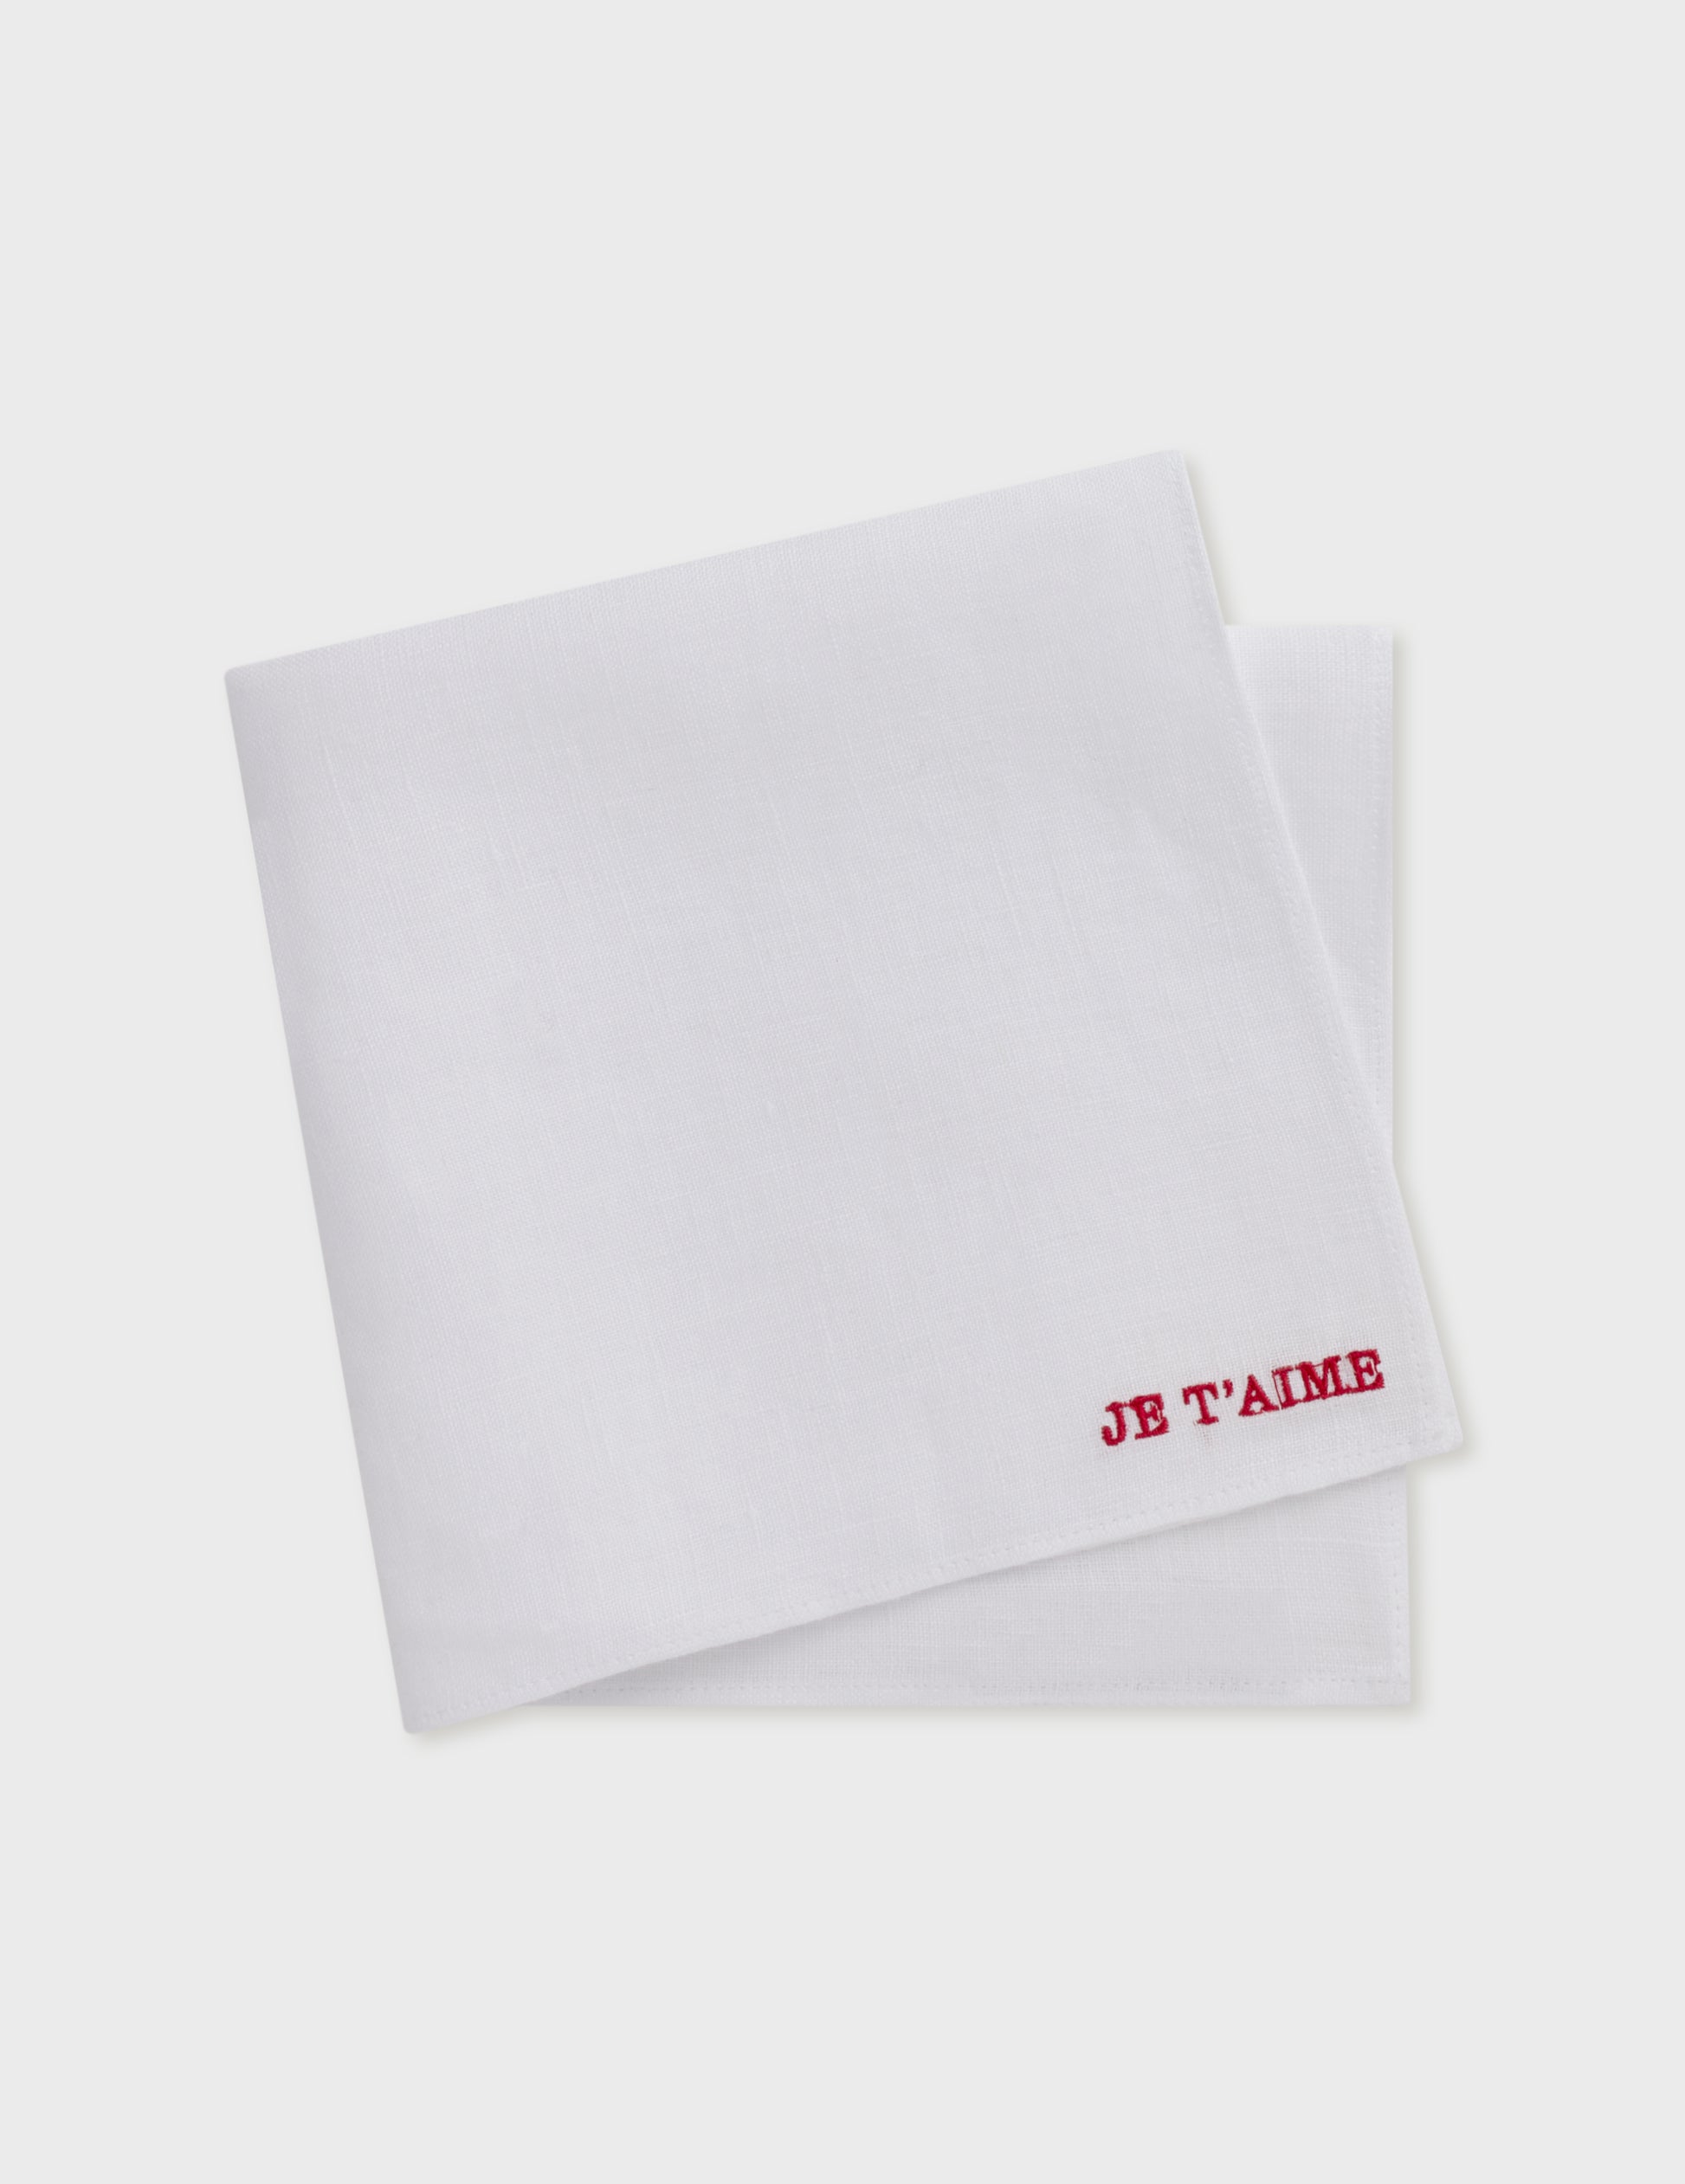 White "Je t'aime" pocket square with red embroidery